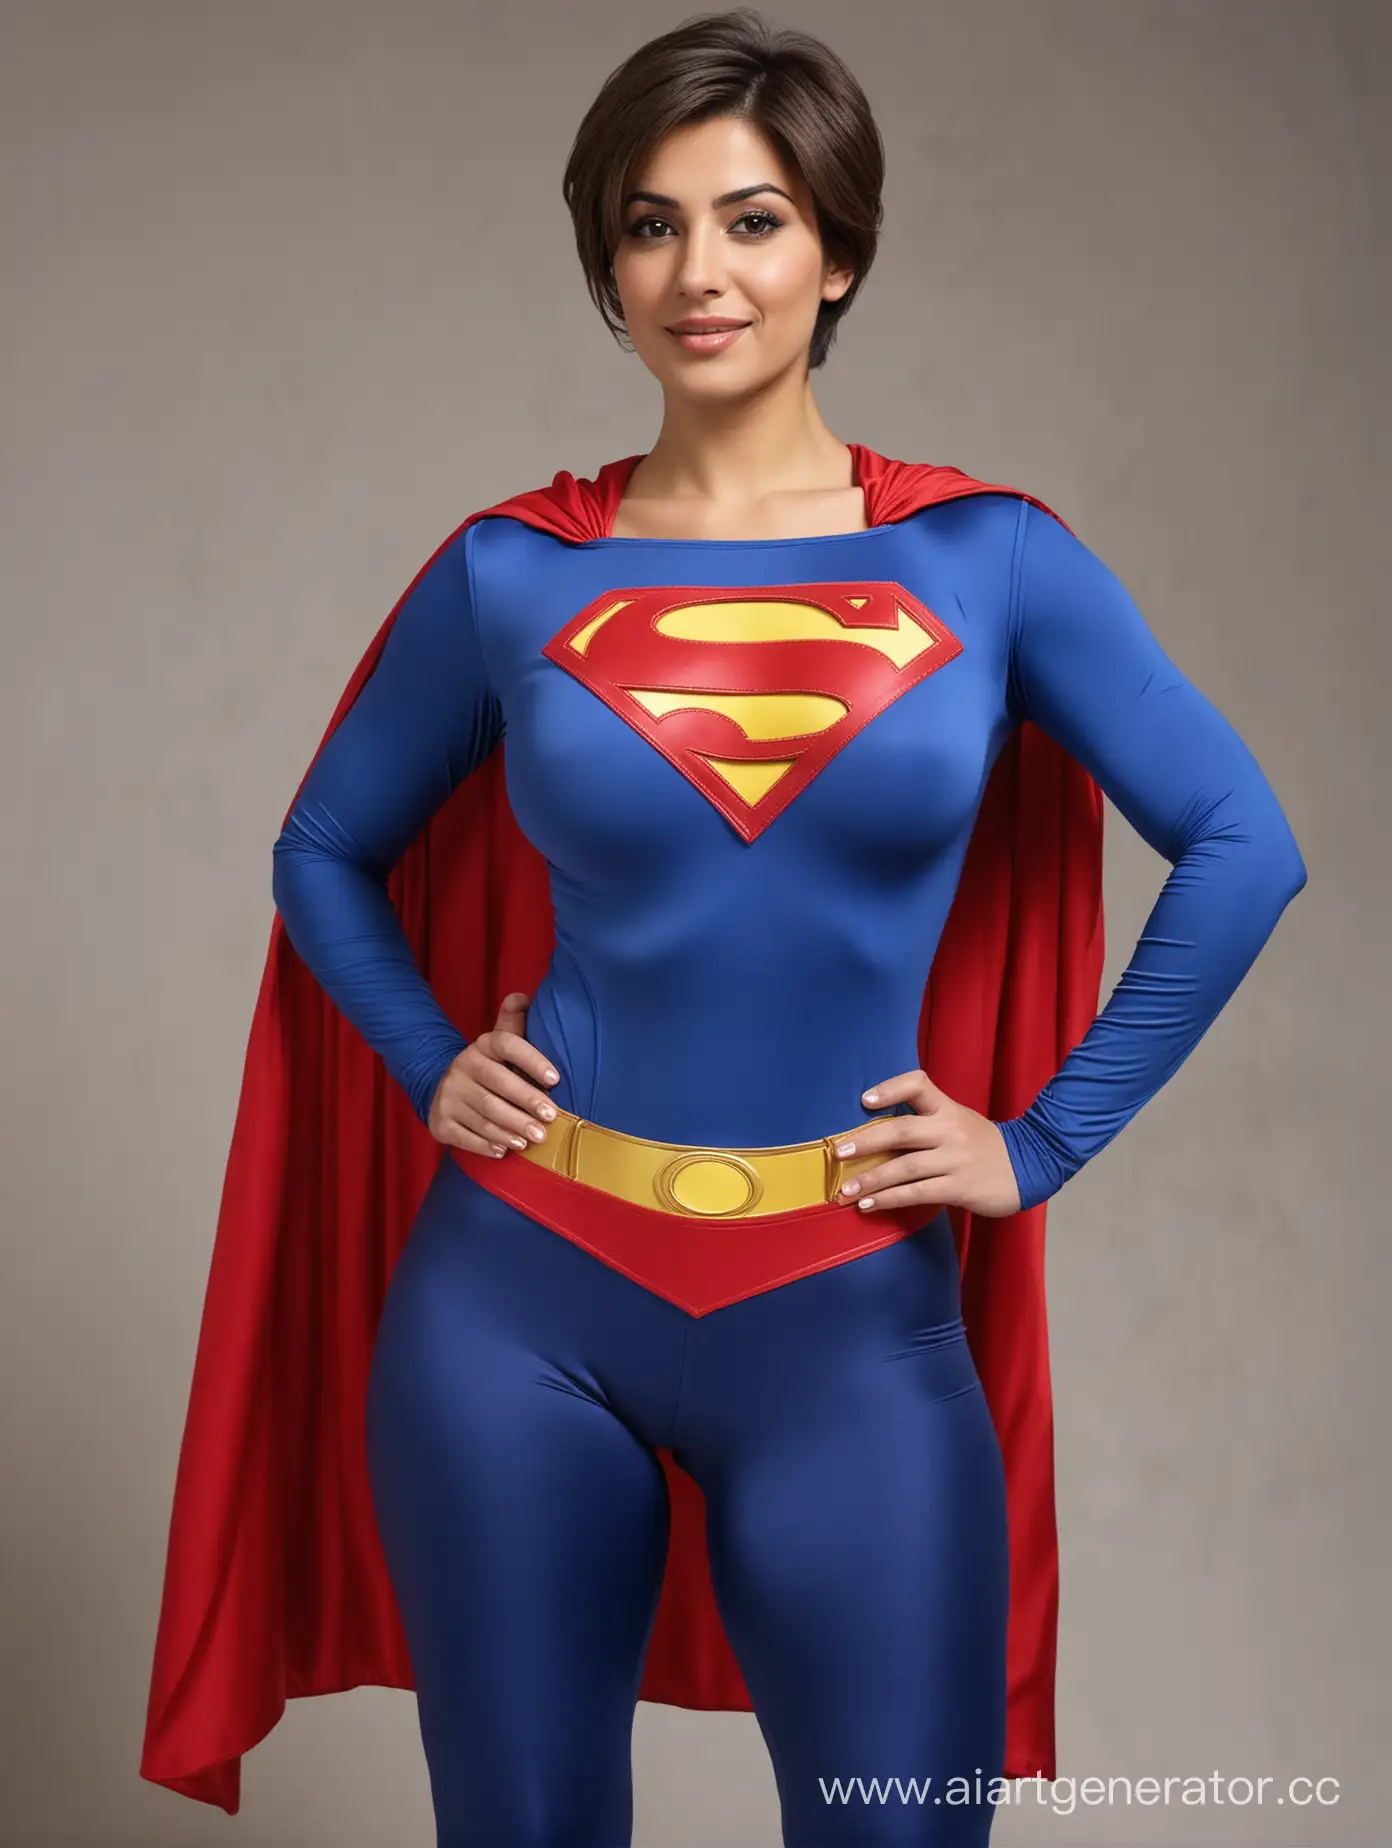 A beautiful Middle Eastern woman with short brown hair, age 30, she weighs 250 pounds, She is proud and smug, She has enormous super muscles throughout her body, She is flexing her enormous arms muscles, Her muscles are huge, she is wearing the classic Superman costume, with blue spandex leggings, long blue sleeves, red panties, a flowing cape, red boots